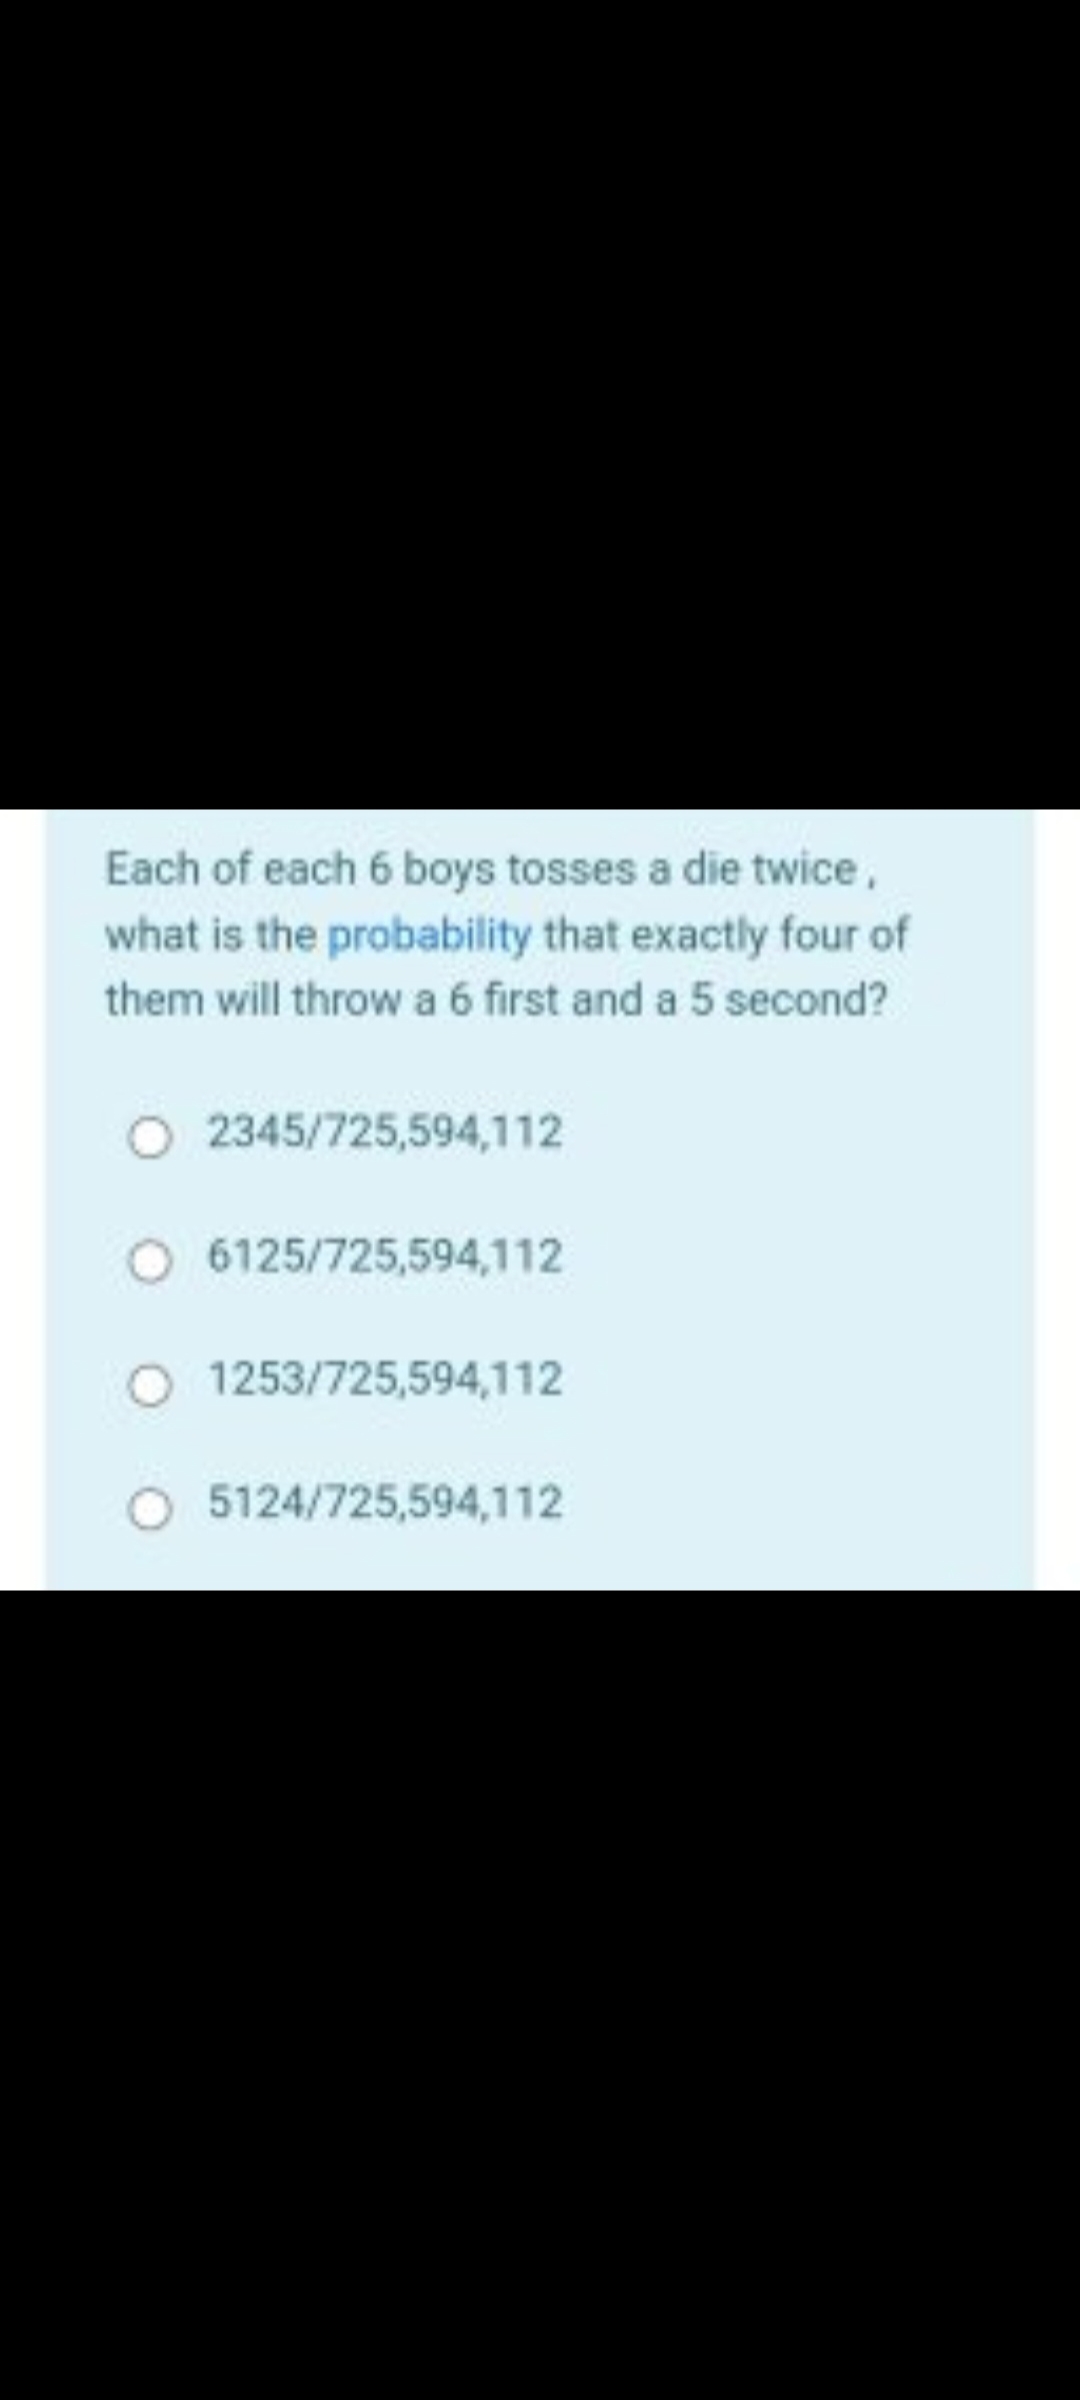 Each of each 6 boys tosses a die twice,
what is the probability that exactly four of
them will throw a 6 first and a 5 second?
O
2345/725,594,112
O 6125/725,594,112
1253/725,594,112
O 5124/725,594,112